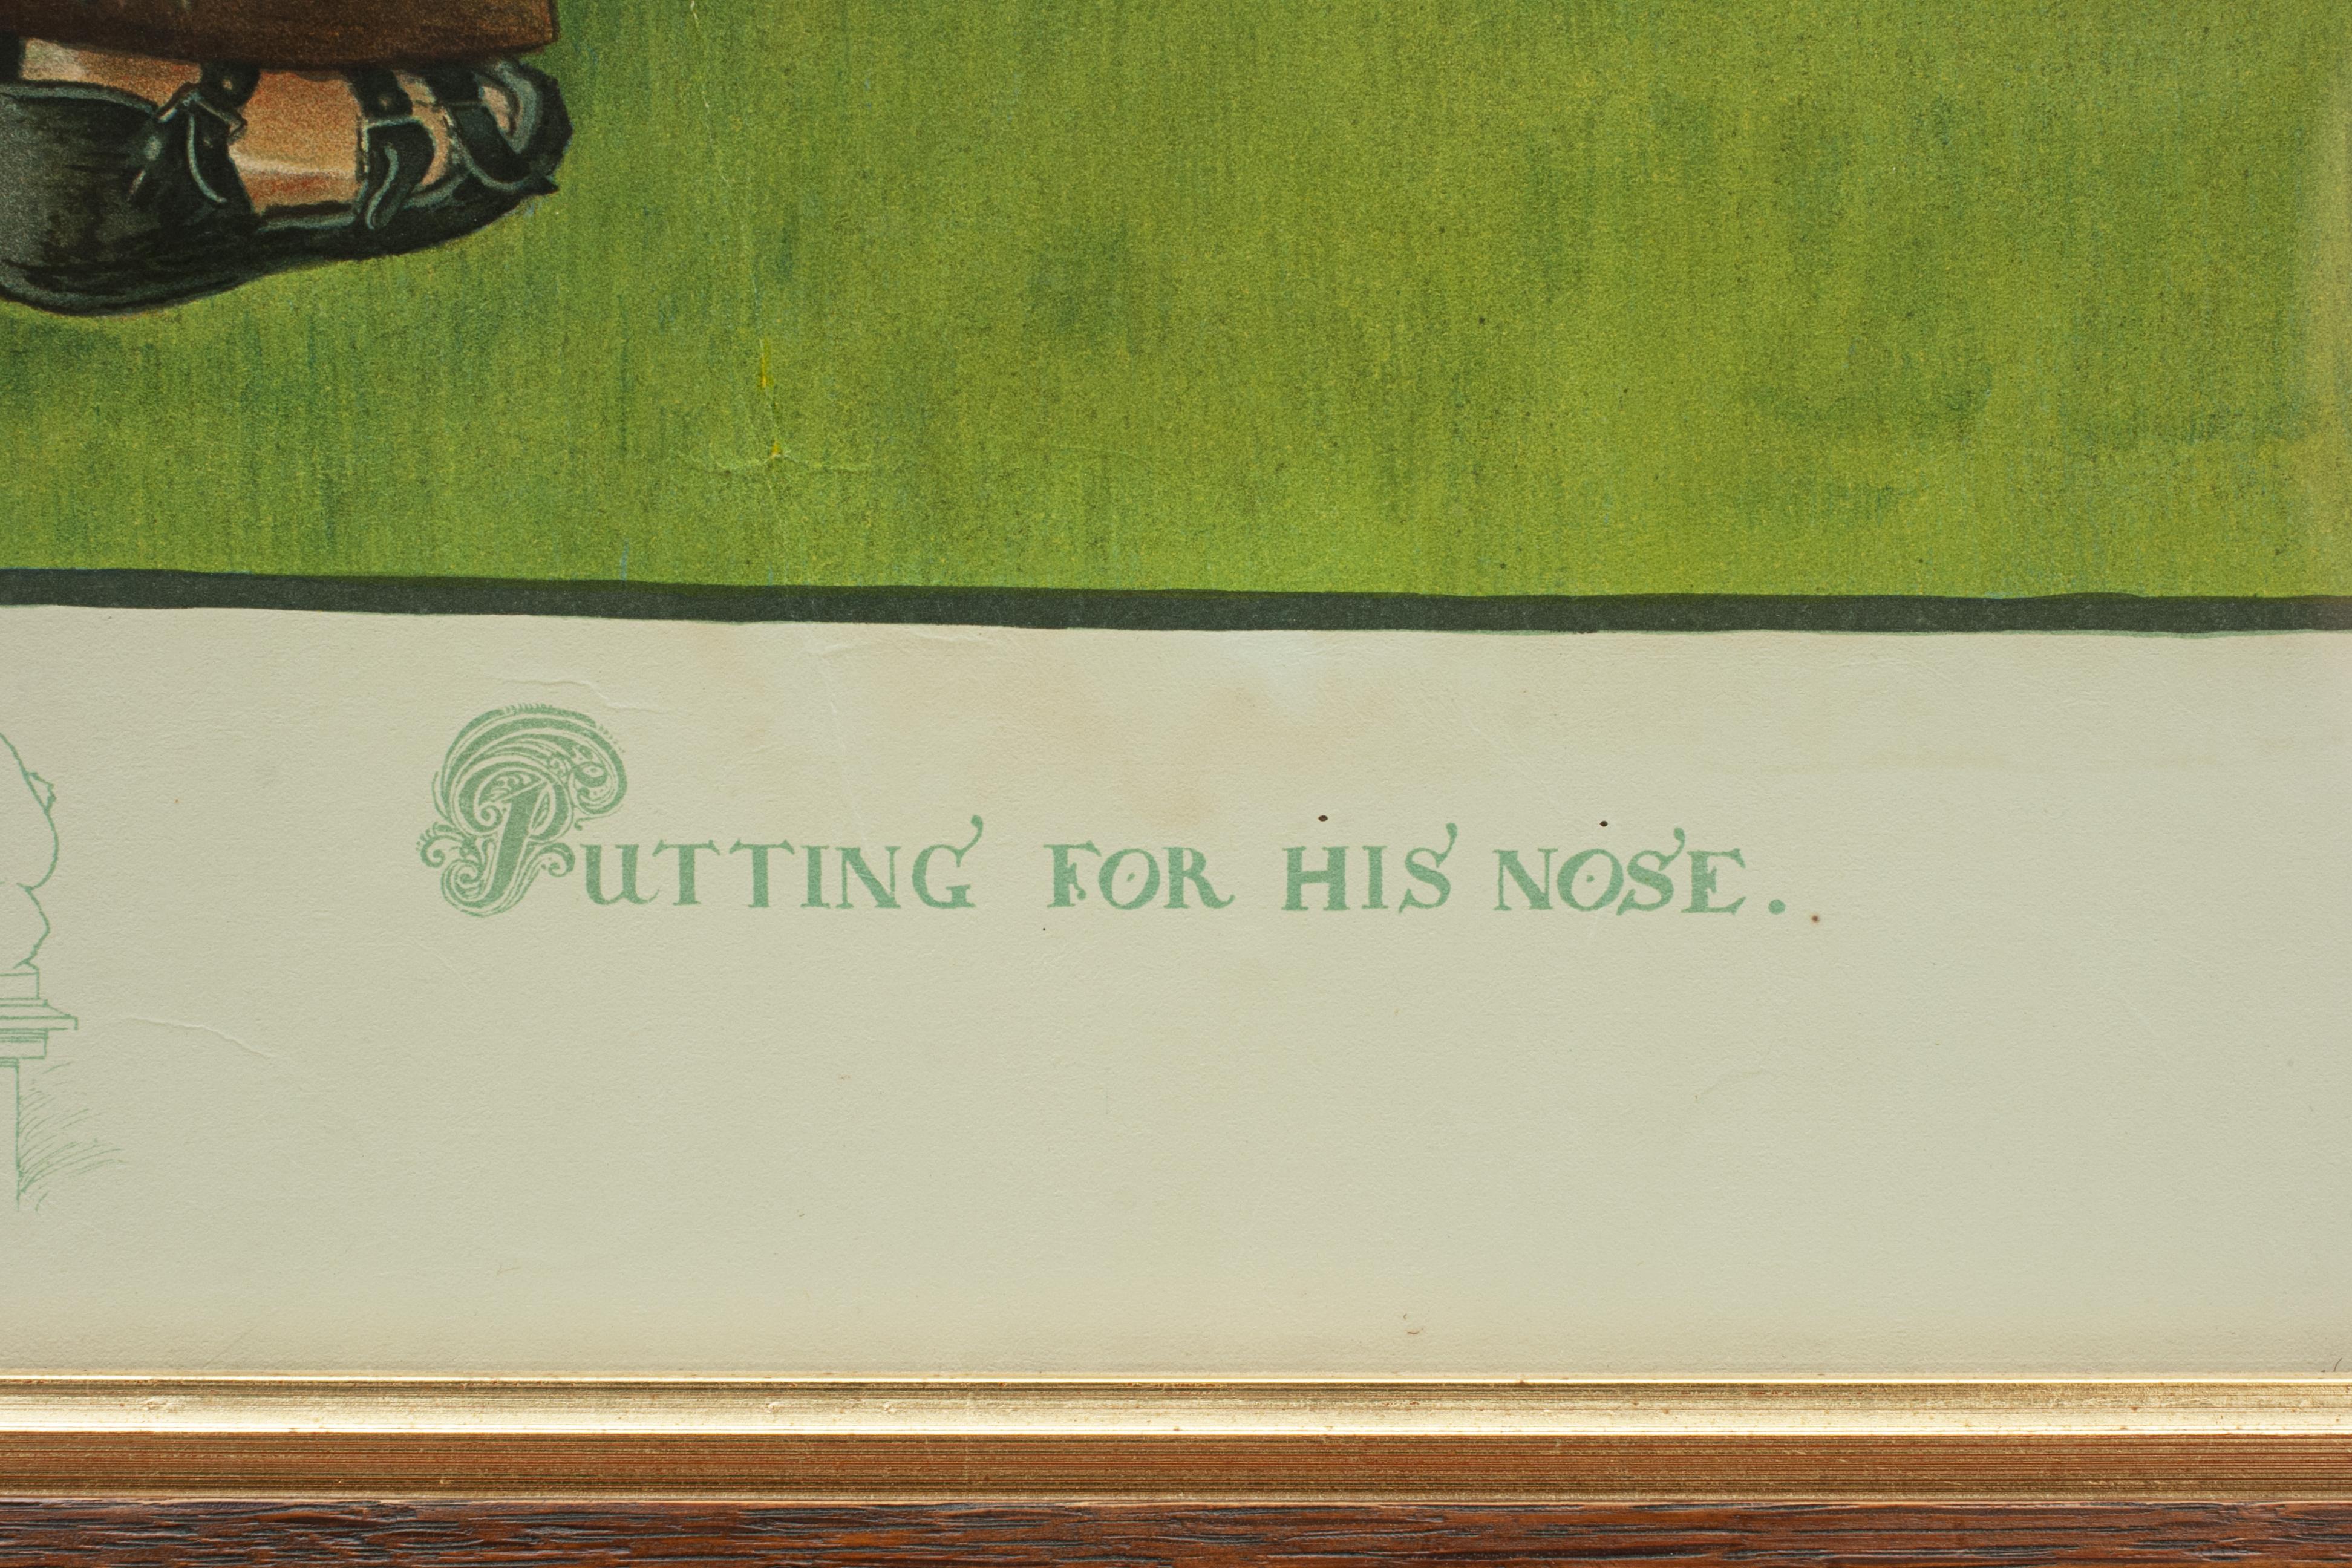 Paper Vintage Golf Art, Humorous Golf Print, Putting for His Nose, Charles Crombie For Sale